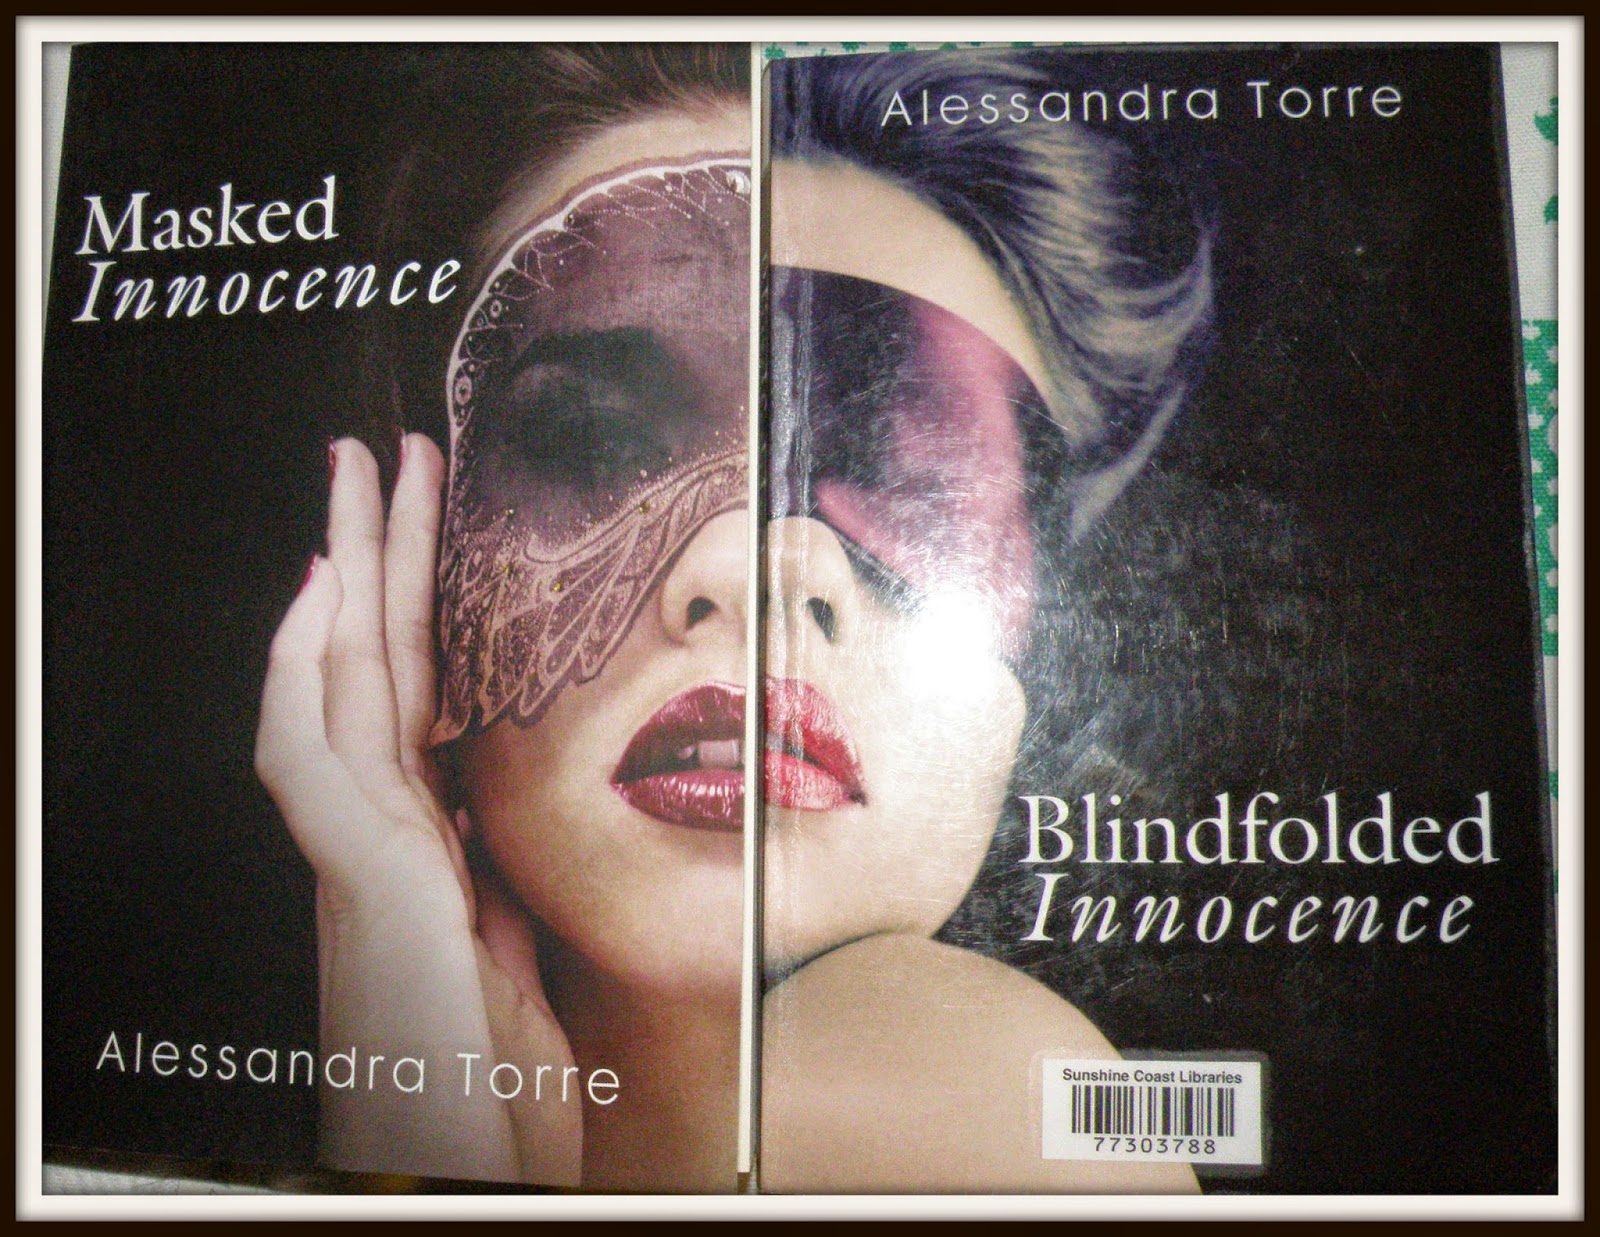 Novels On The Run: BOOK REVIEW - BLINDFOLDED INNOCENCE by ALESSANDRA TORRE  - INNOCENCE # 1 - HARLEQUIN - EROTIC CONTEMPORARY ROMANCE